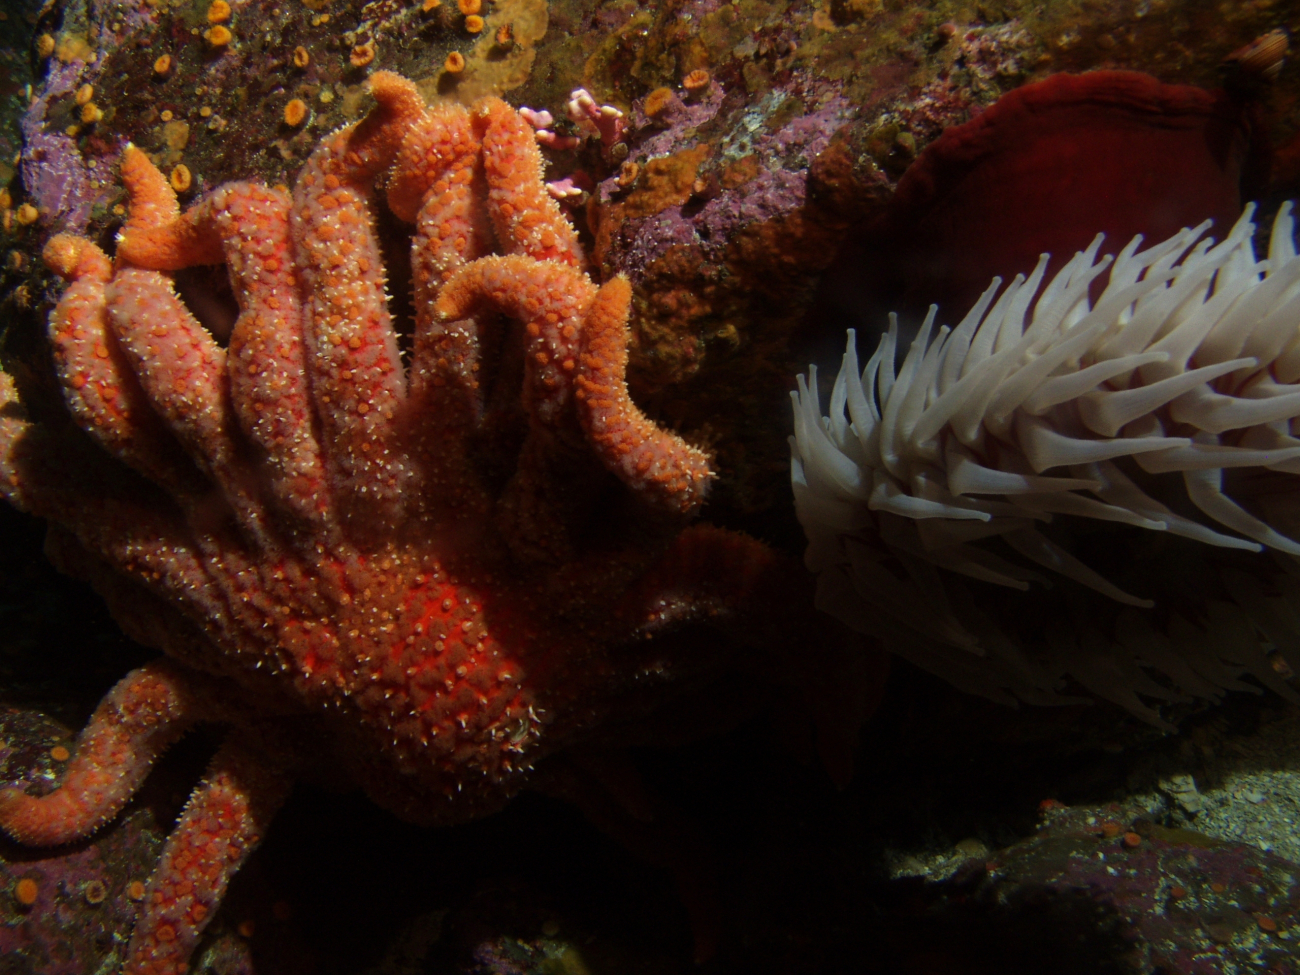 Sunflower sea star (Pycnopodia helianthoides) and fish eatingsea anemone up close at 30 meters depth